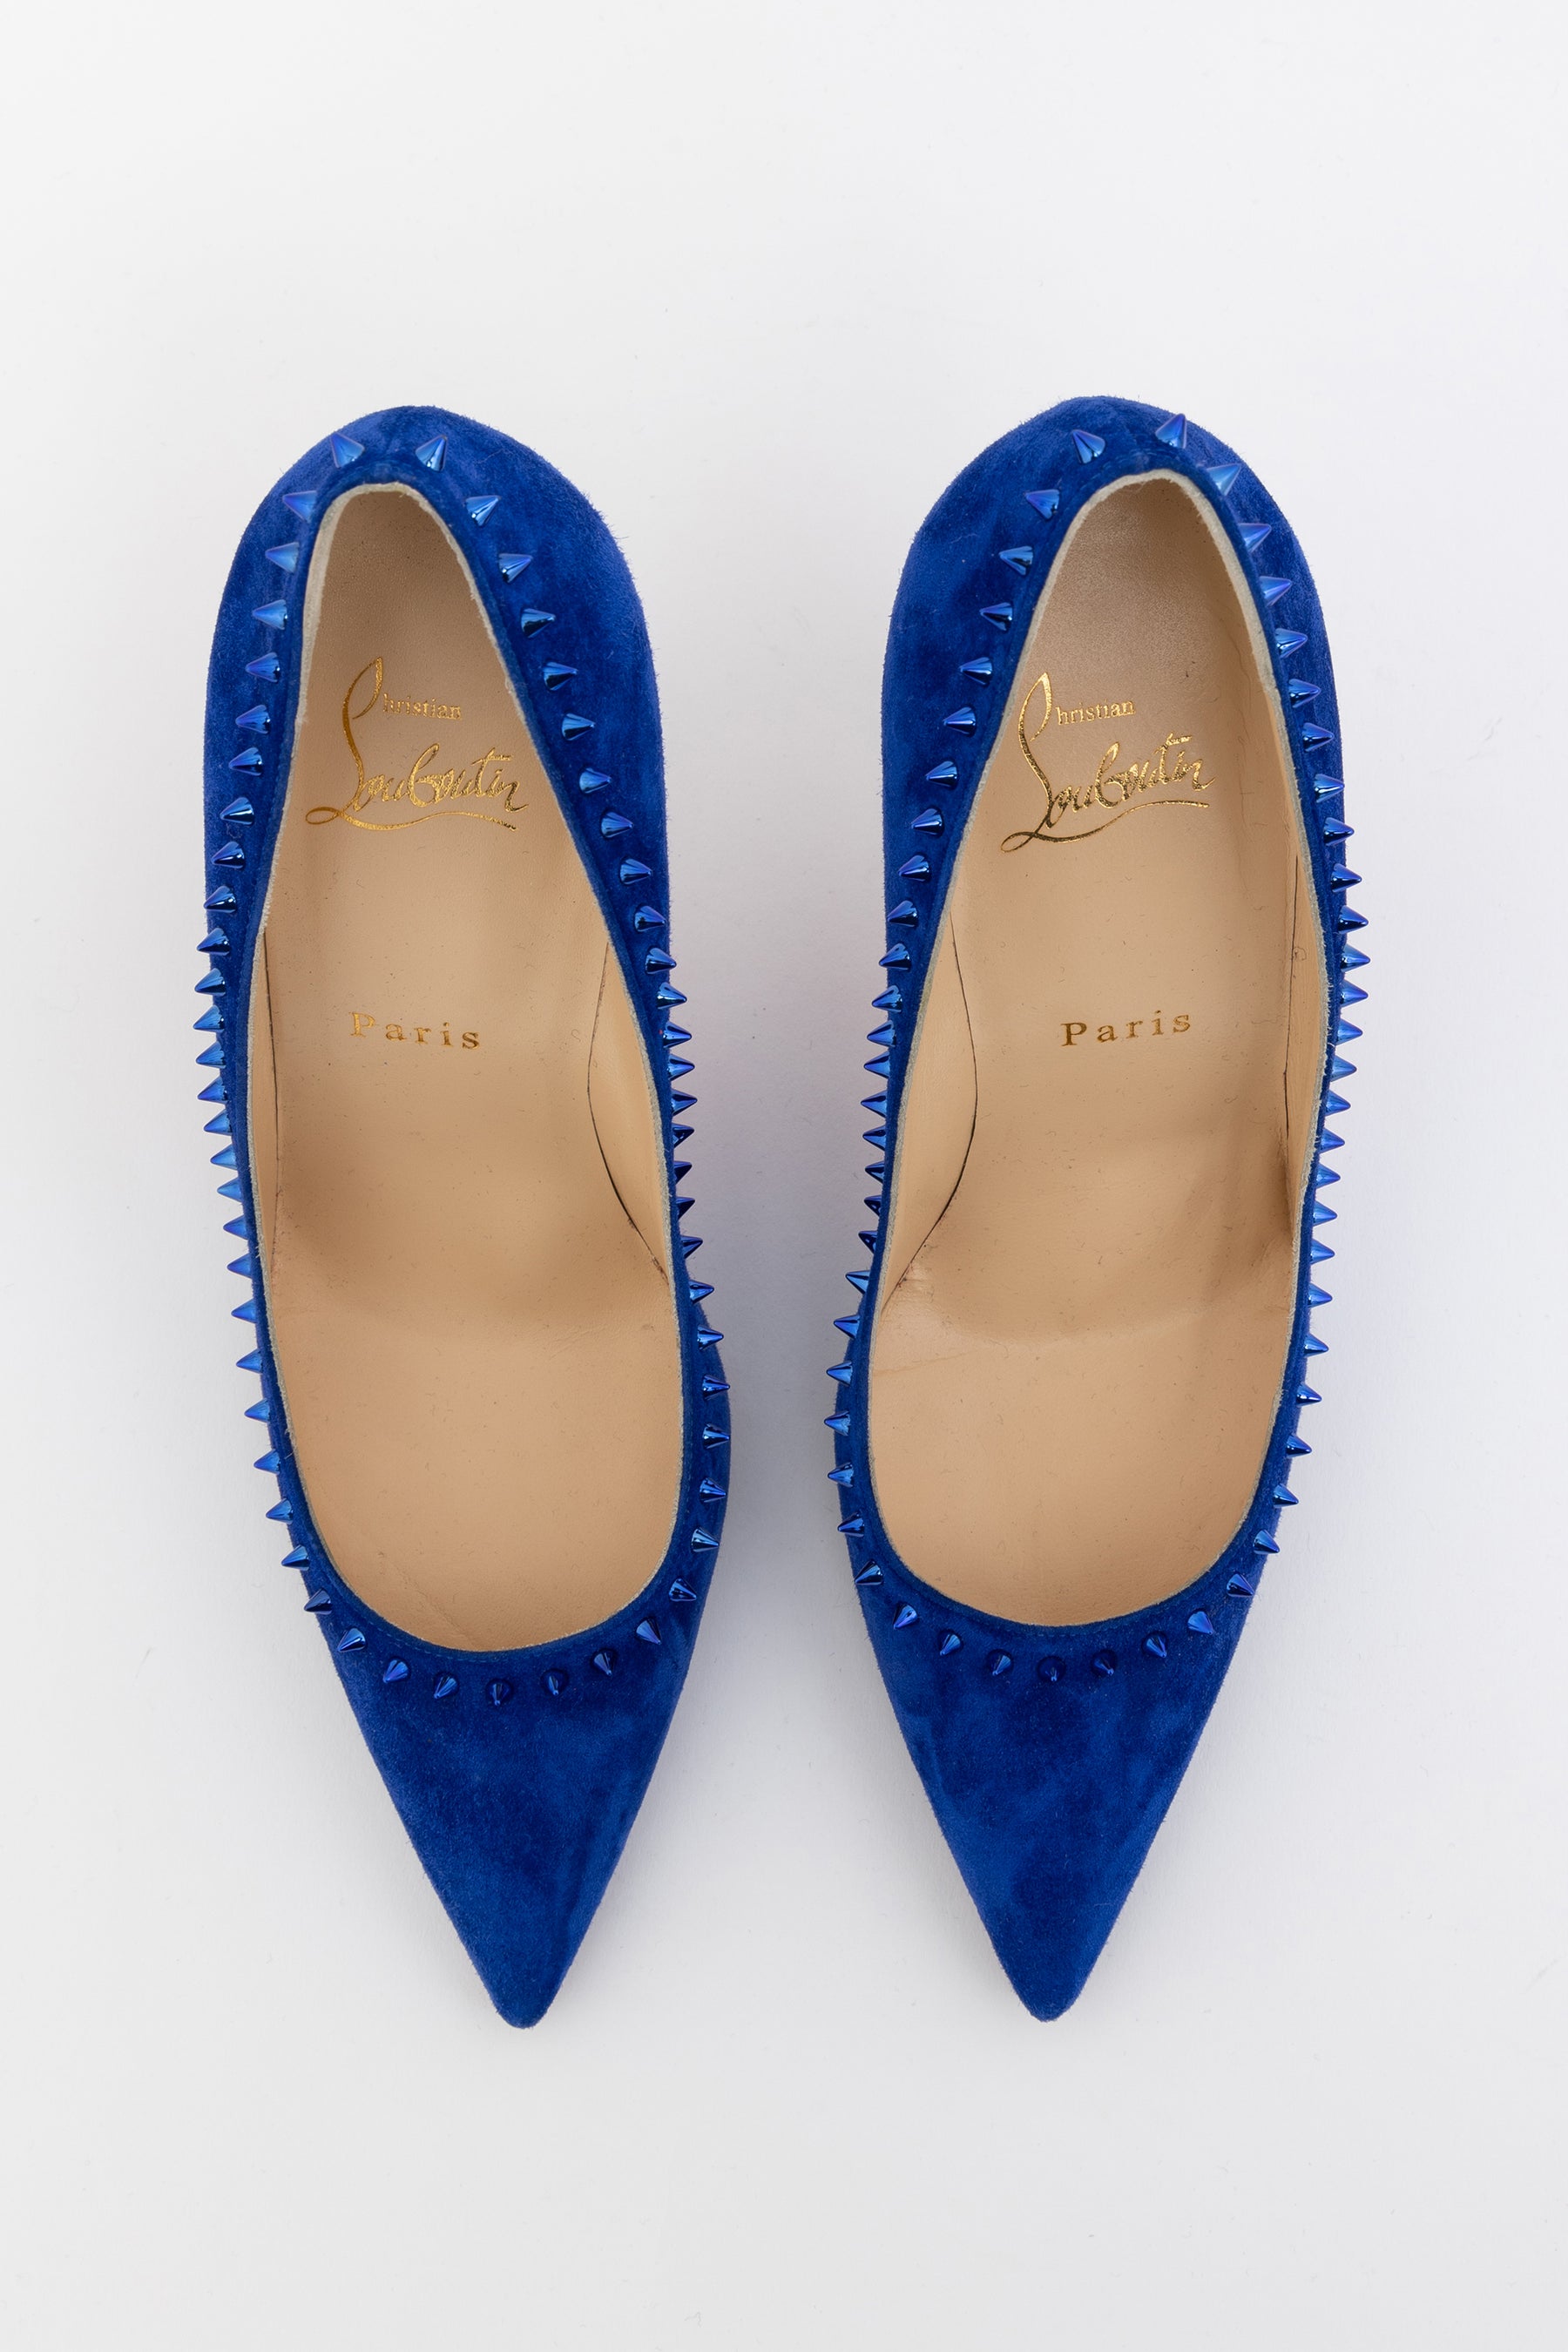 Anjalina Spiked Suede Pumps